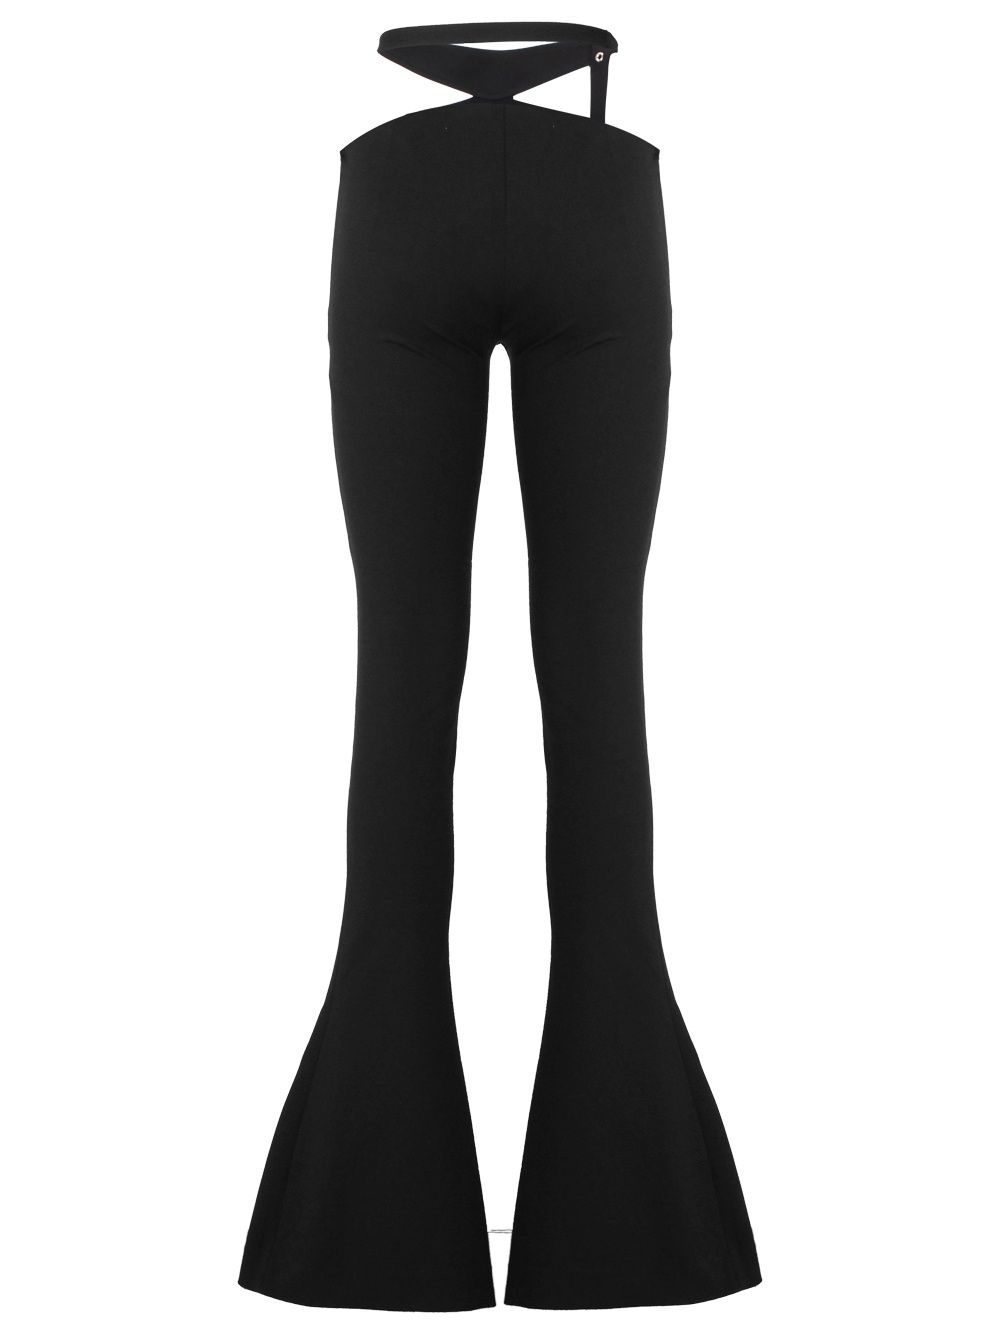 Black trousers with cut-out details in a stretch design